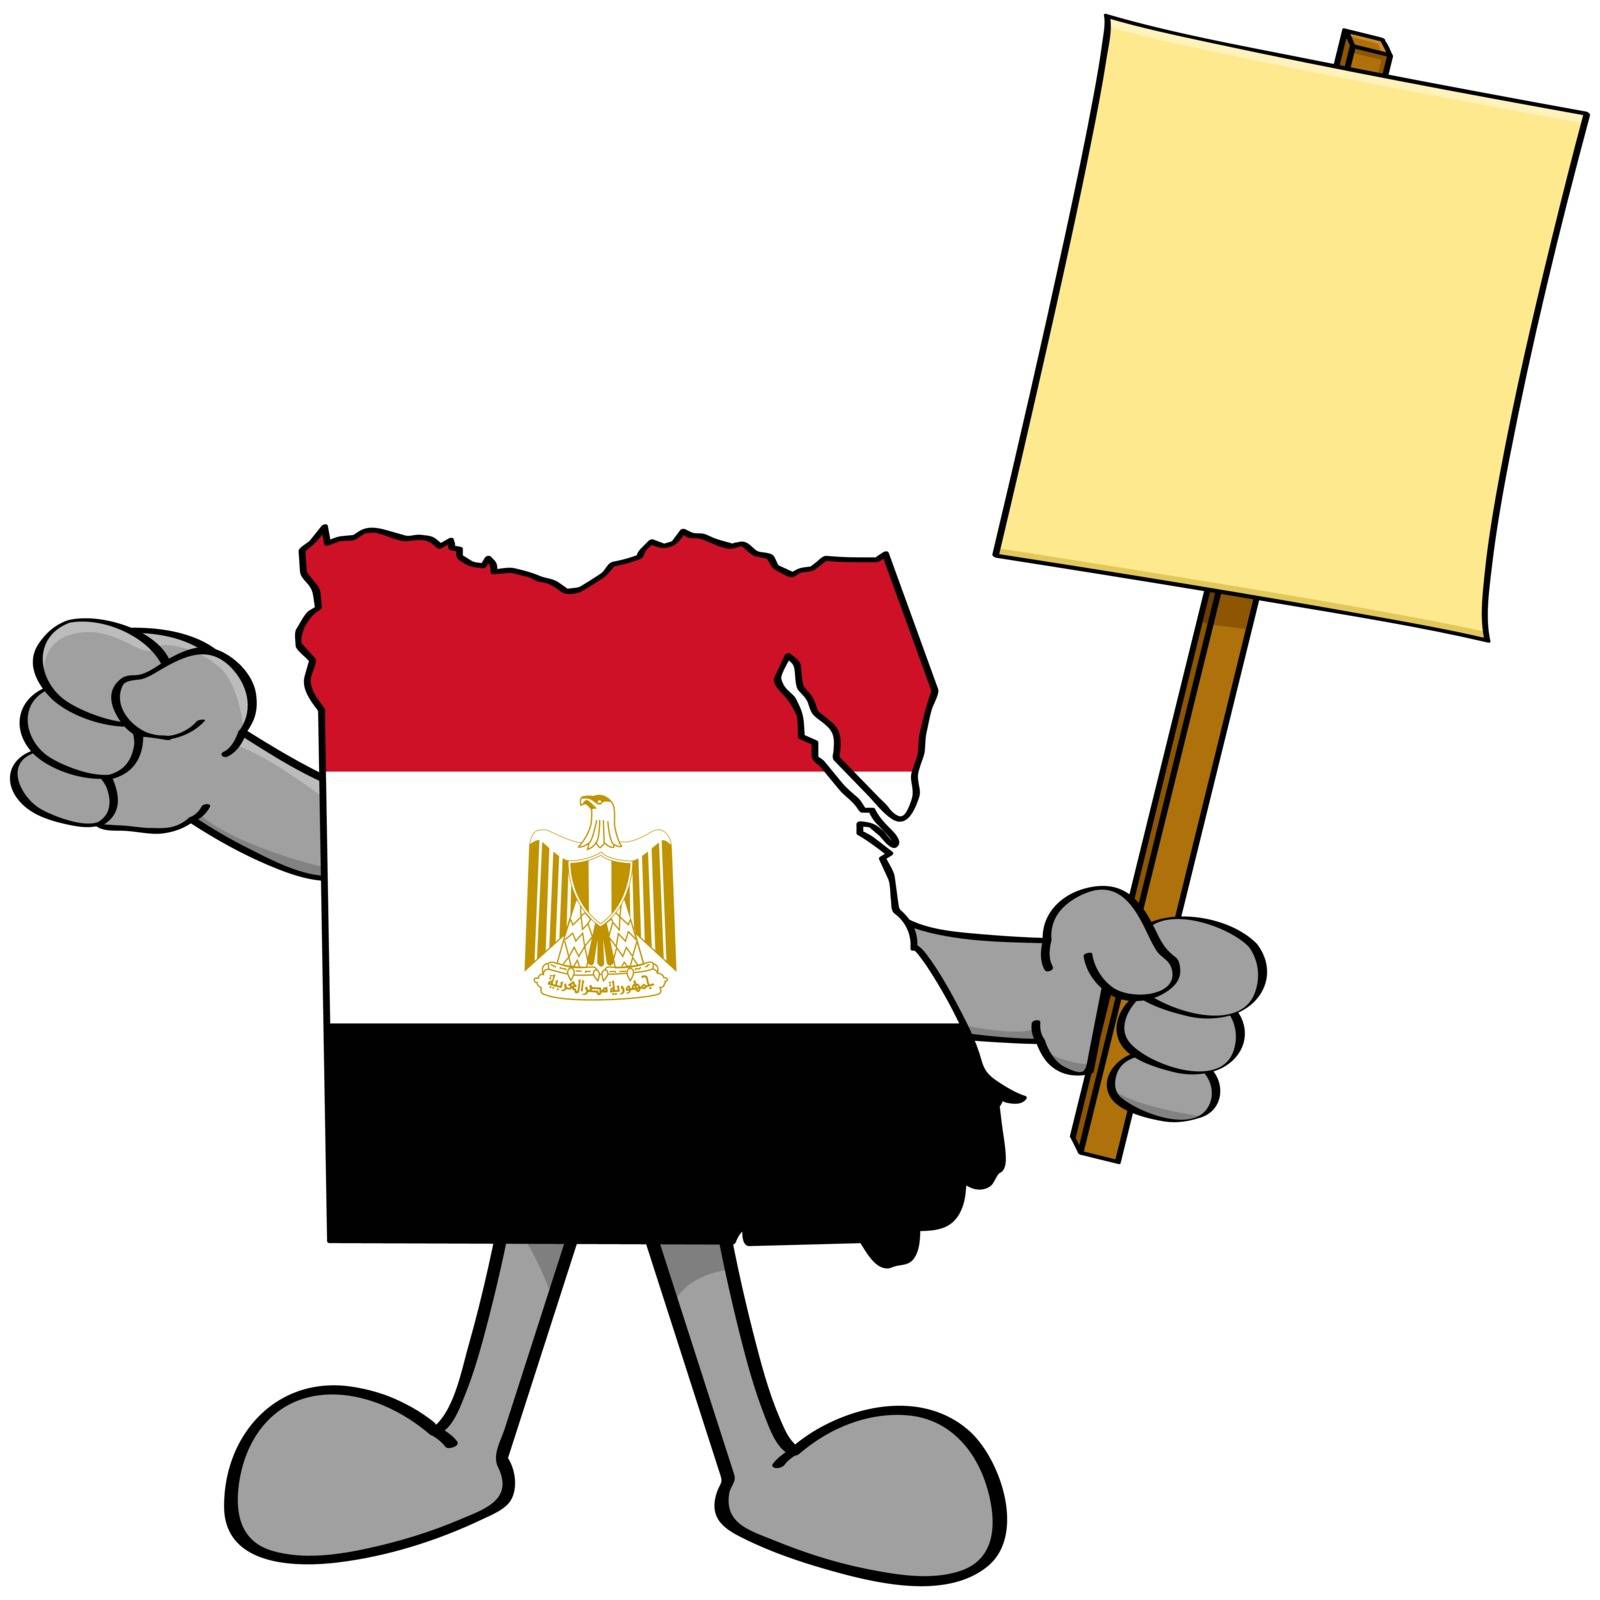 Concept illustration showing a map of Egypt holding a protest sign